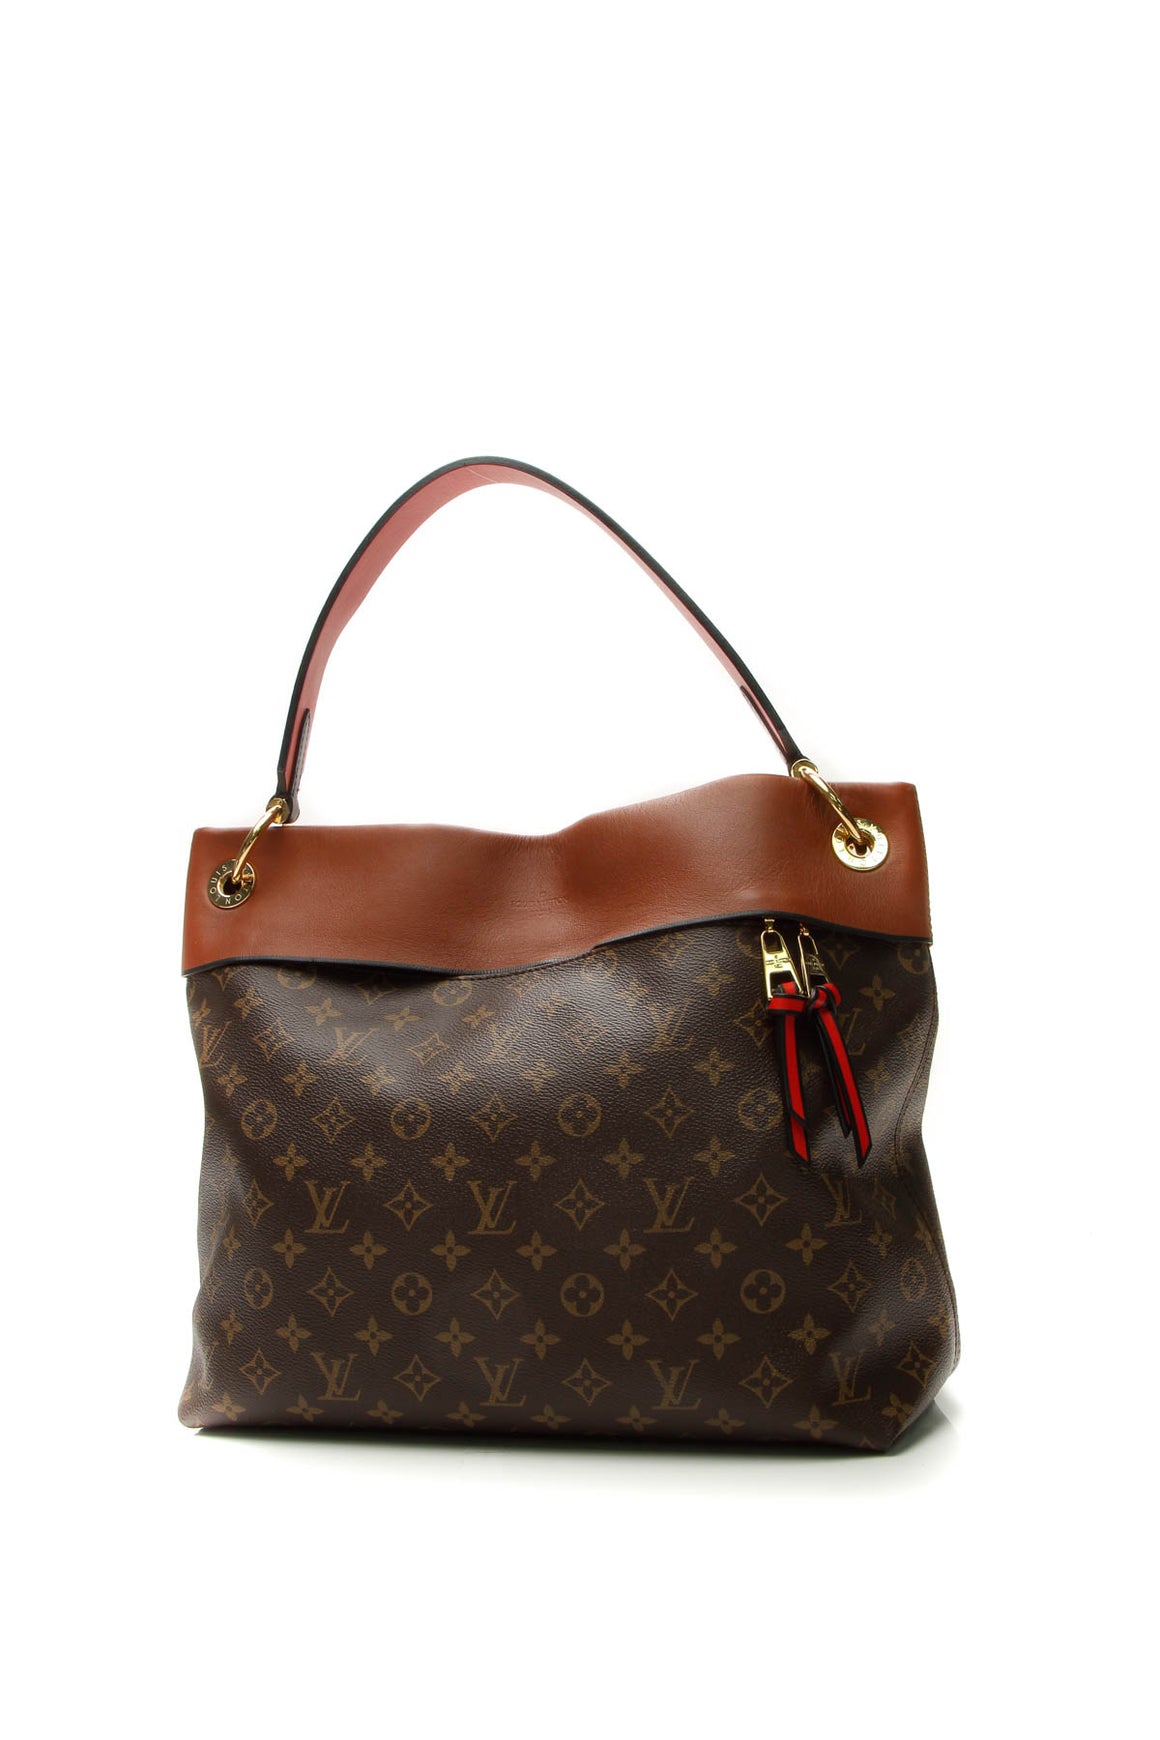 Louis Vuitton Tuileries Discontinued In Us